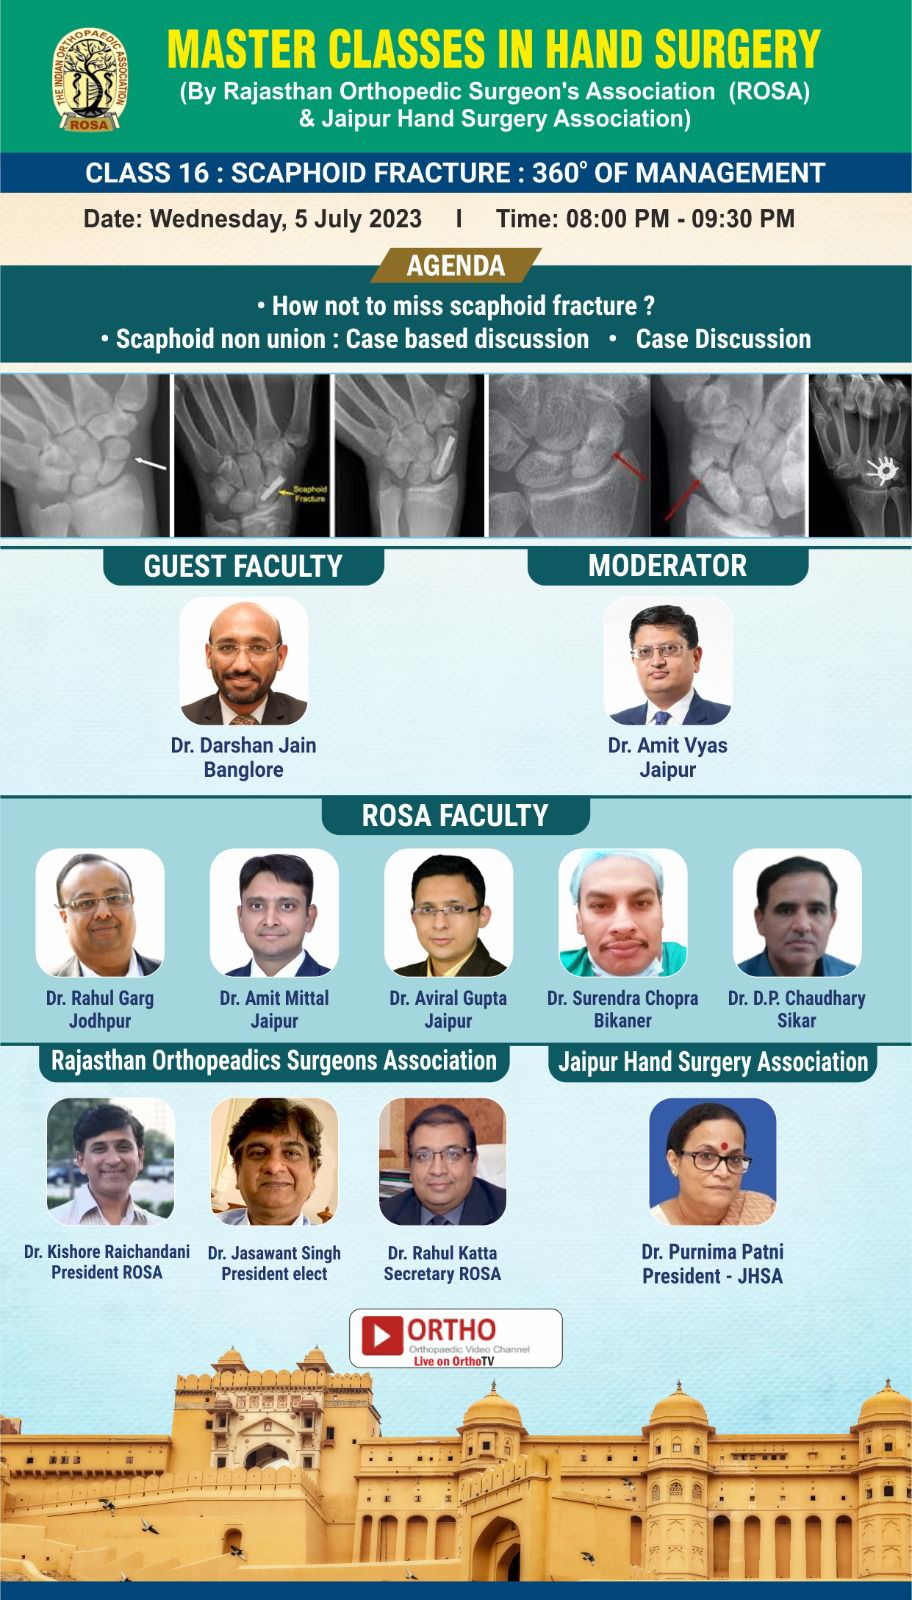 MASTER CLASSES IN HAND SURGERY - By Rajasthan Orthopedic Surgeon's Association (ROSA) & Jaipur Hand Surgery Association - CLASS 16: SCAPHOID FRACTURE : 360° OF MANAGEMENT